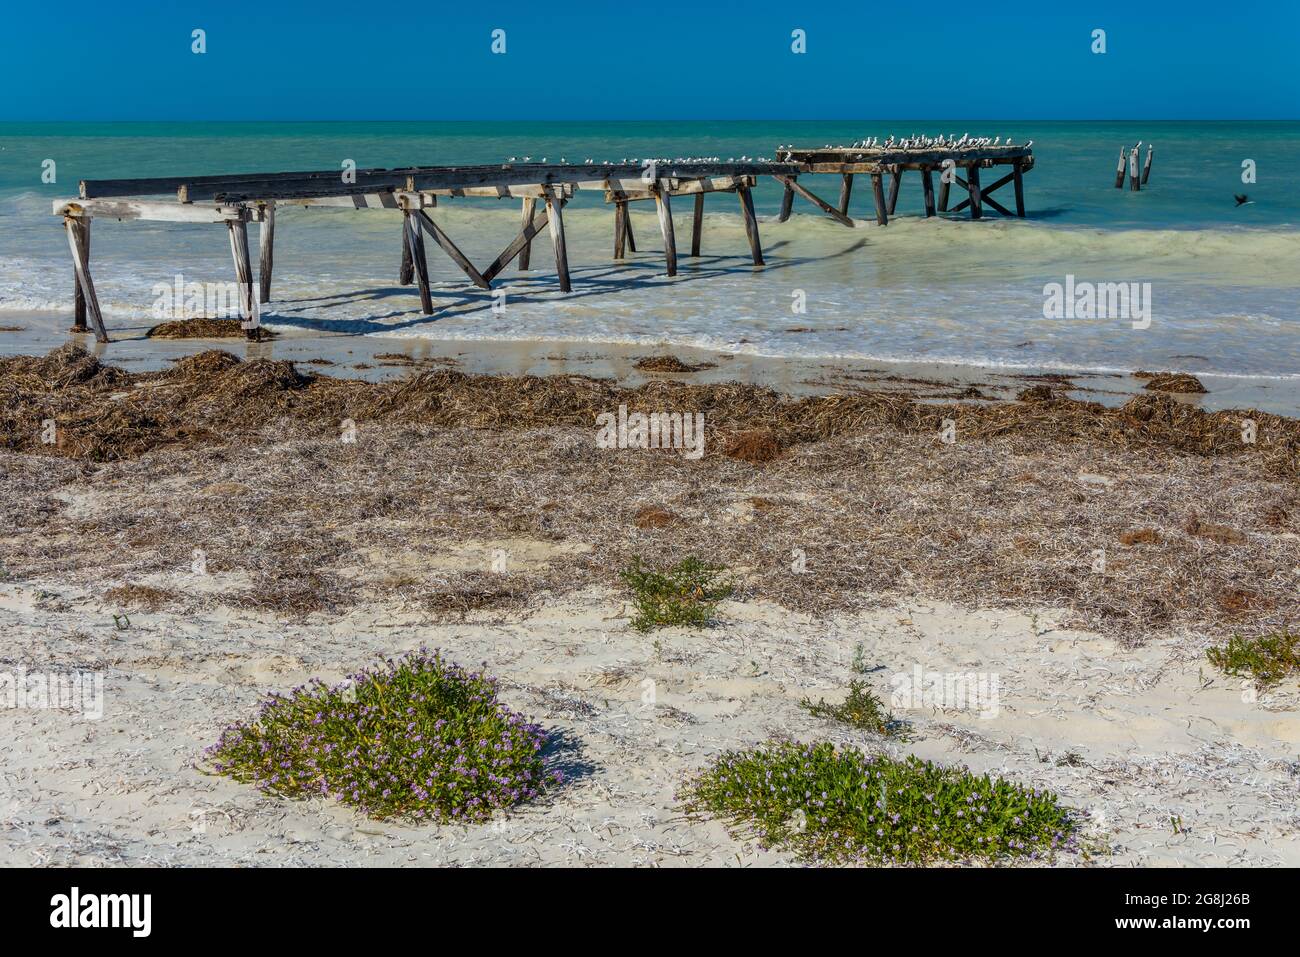 The abandoned jetty on the beach head of the Old Eucla Telegraphy Station along the Nullarbor coastline of Western Australia. Stock Photo